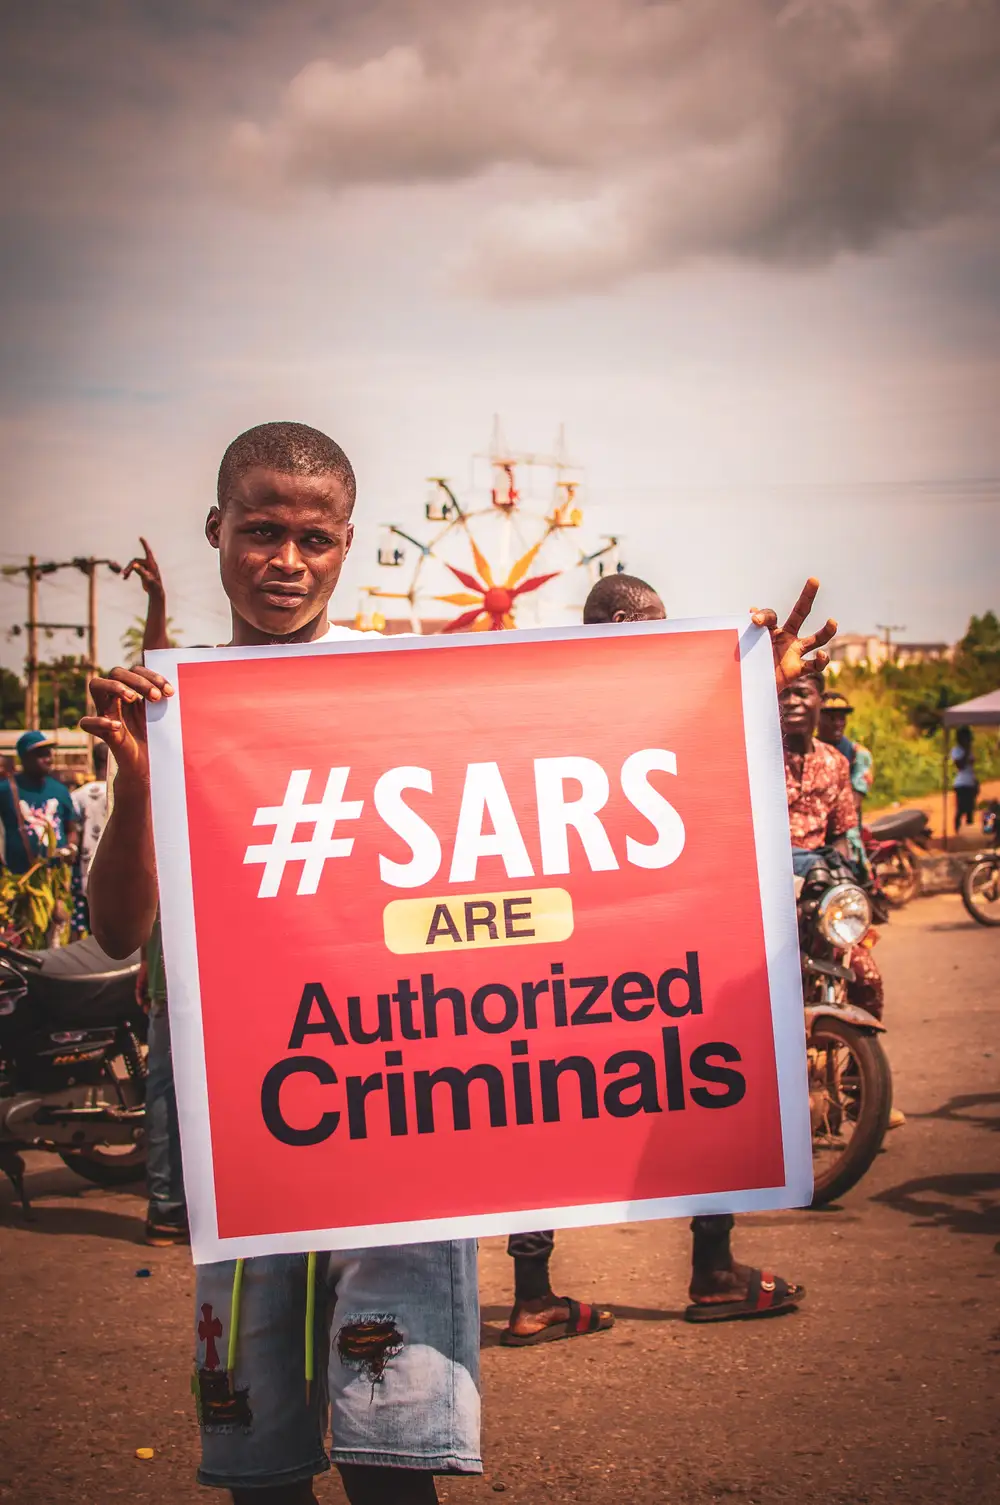 end sars protest